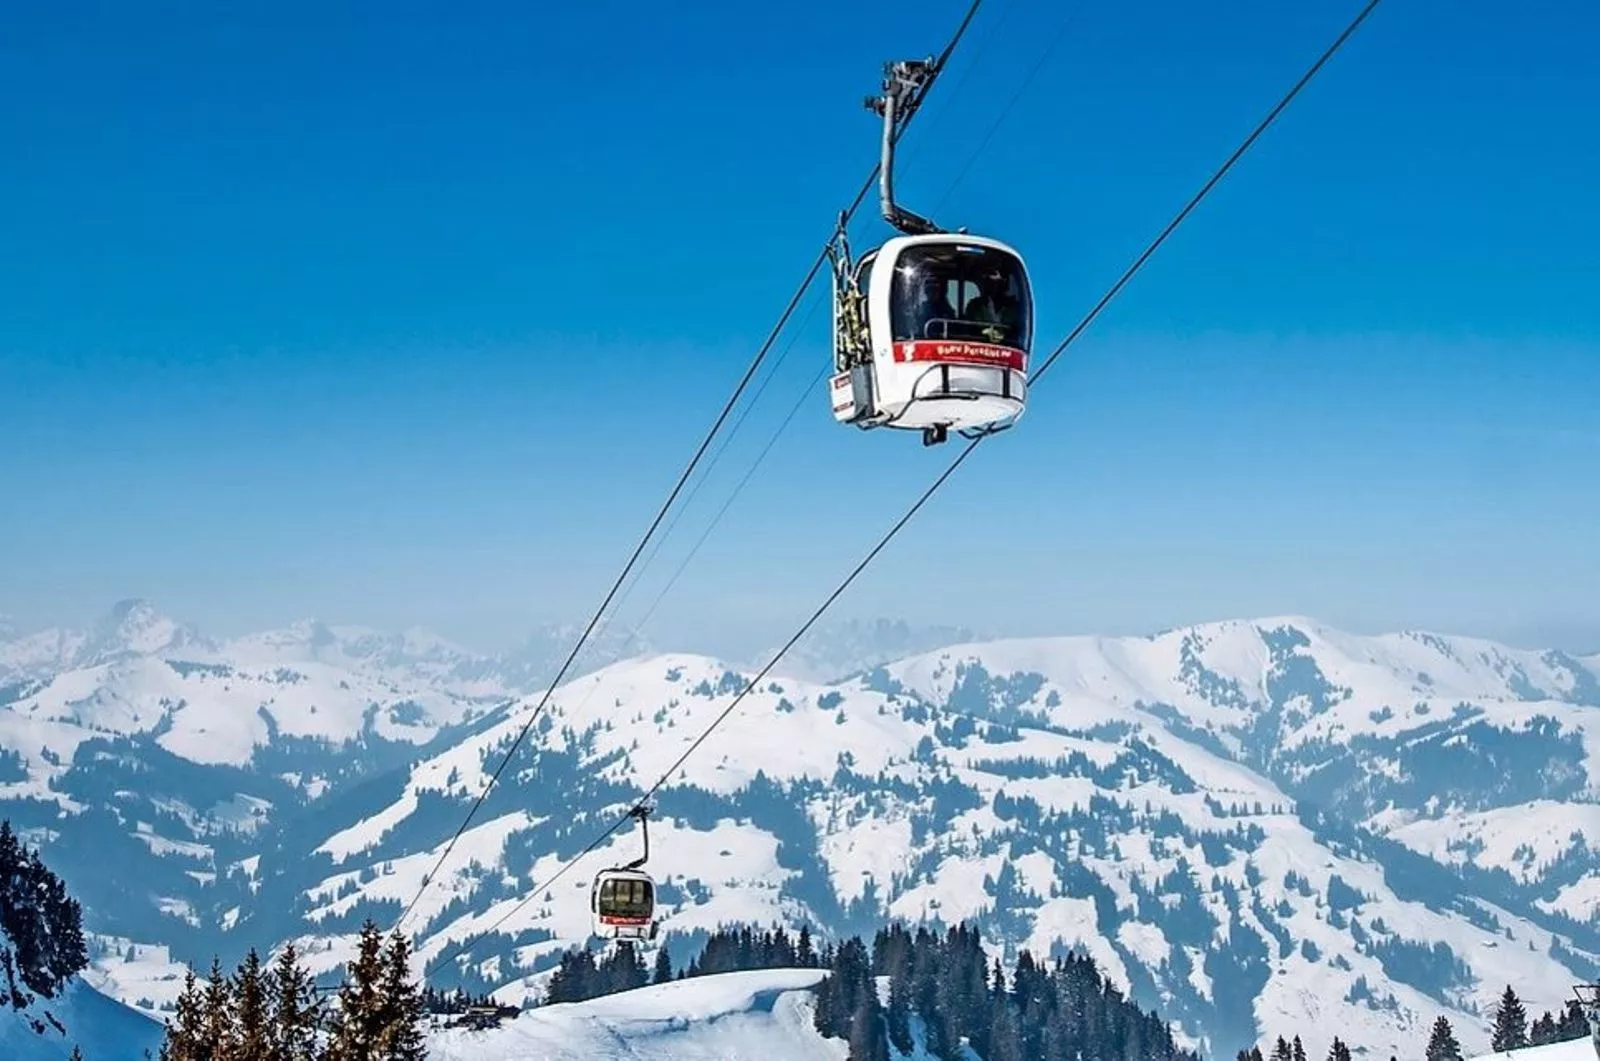 Bergbahnen Destination Gstaad AG in Switzerland, Europe | Snowboarding,Skiing - Rated 3.5